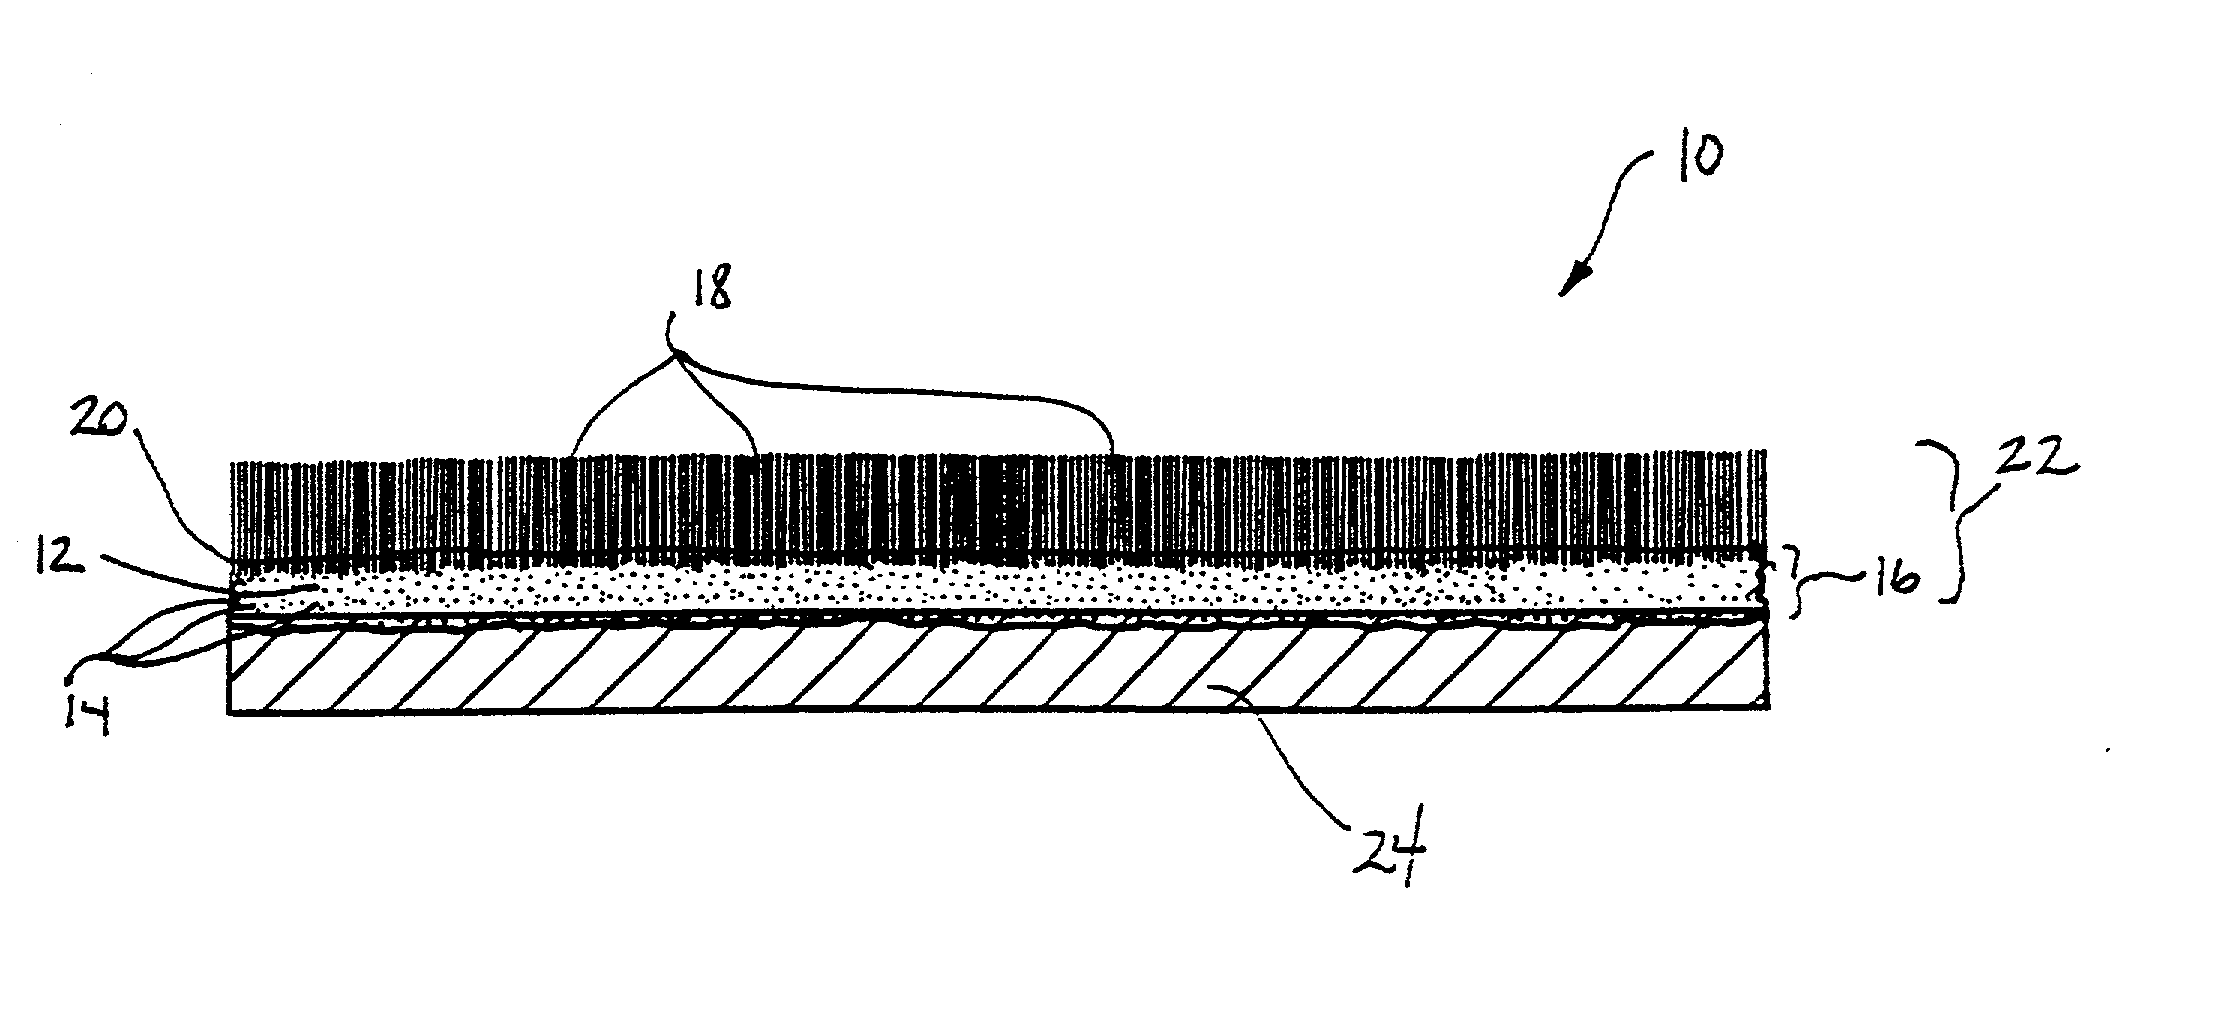 Fabric coating containing energy absorbing phase change material and method of manufacturing same